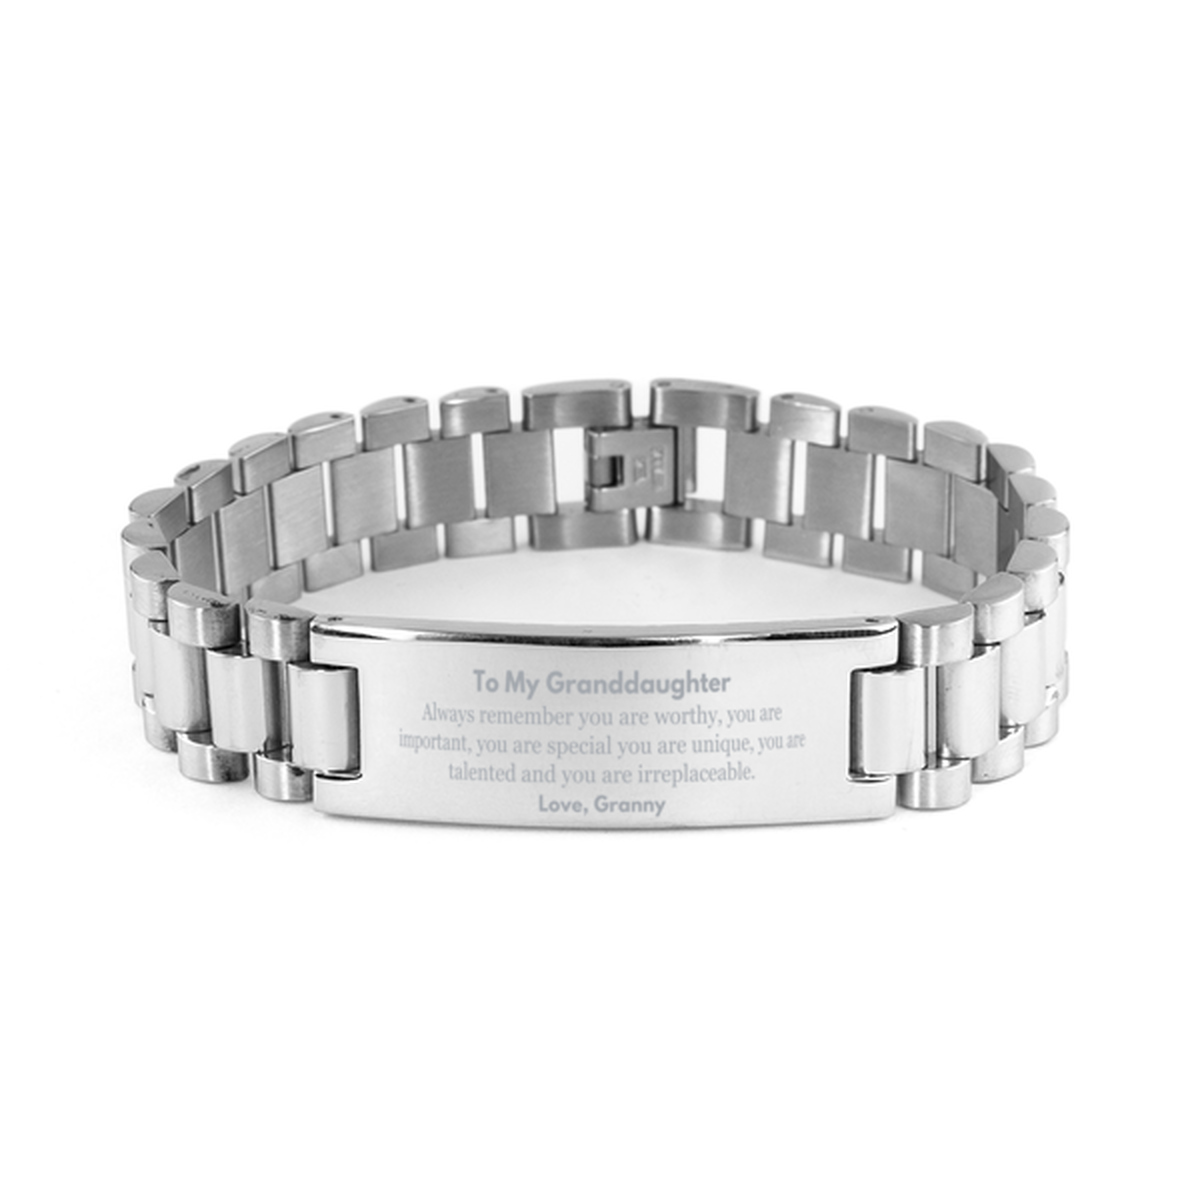 Granddaughter Birthday Gifts from Granny, Inspirational Ladder Stainless Steel Bracelet for Granddaughter Christmas Graduation Gifts for Granddaughter Always remember you are worthy, you are important. Love, Granny